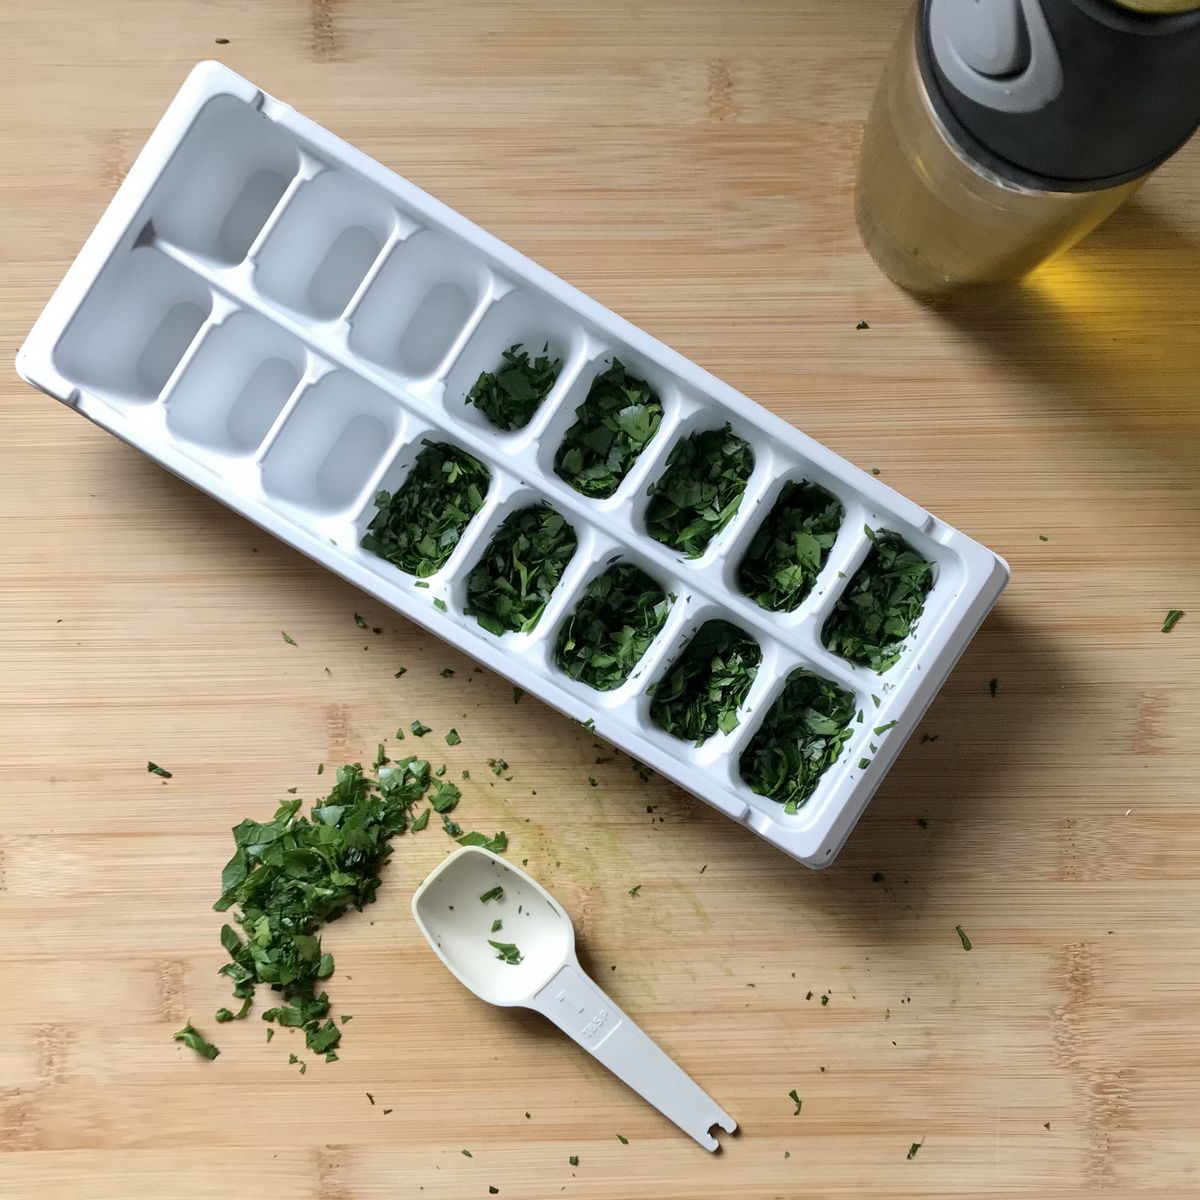 Chopped parsley in the cavities of an ice cube ready ready to be frozen.